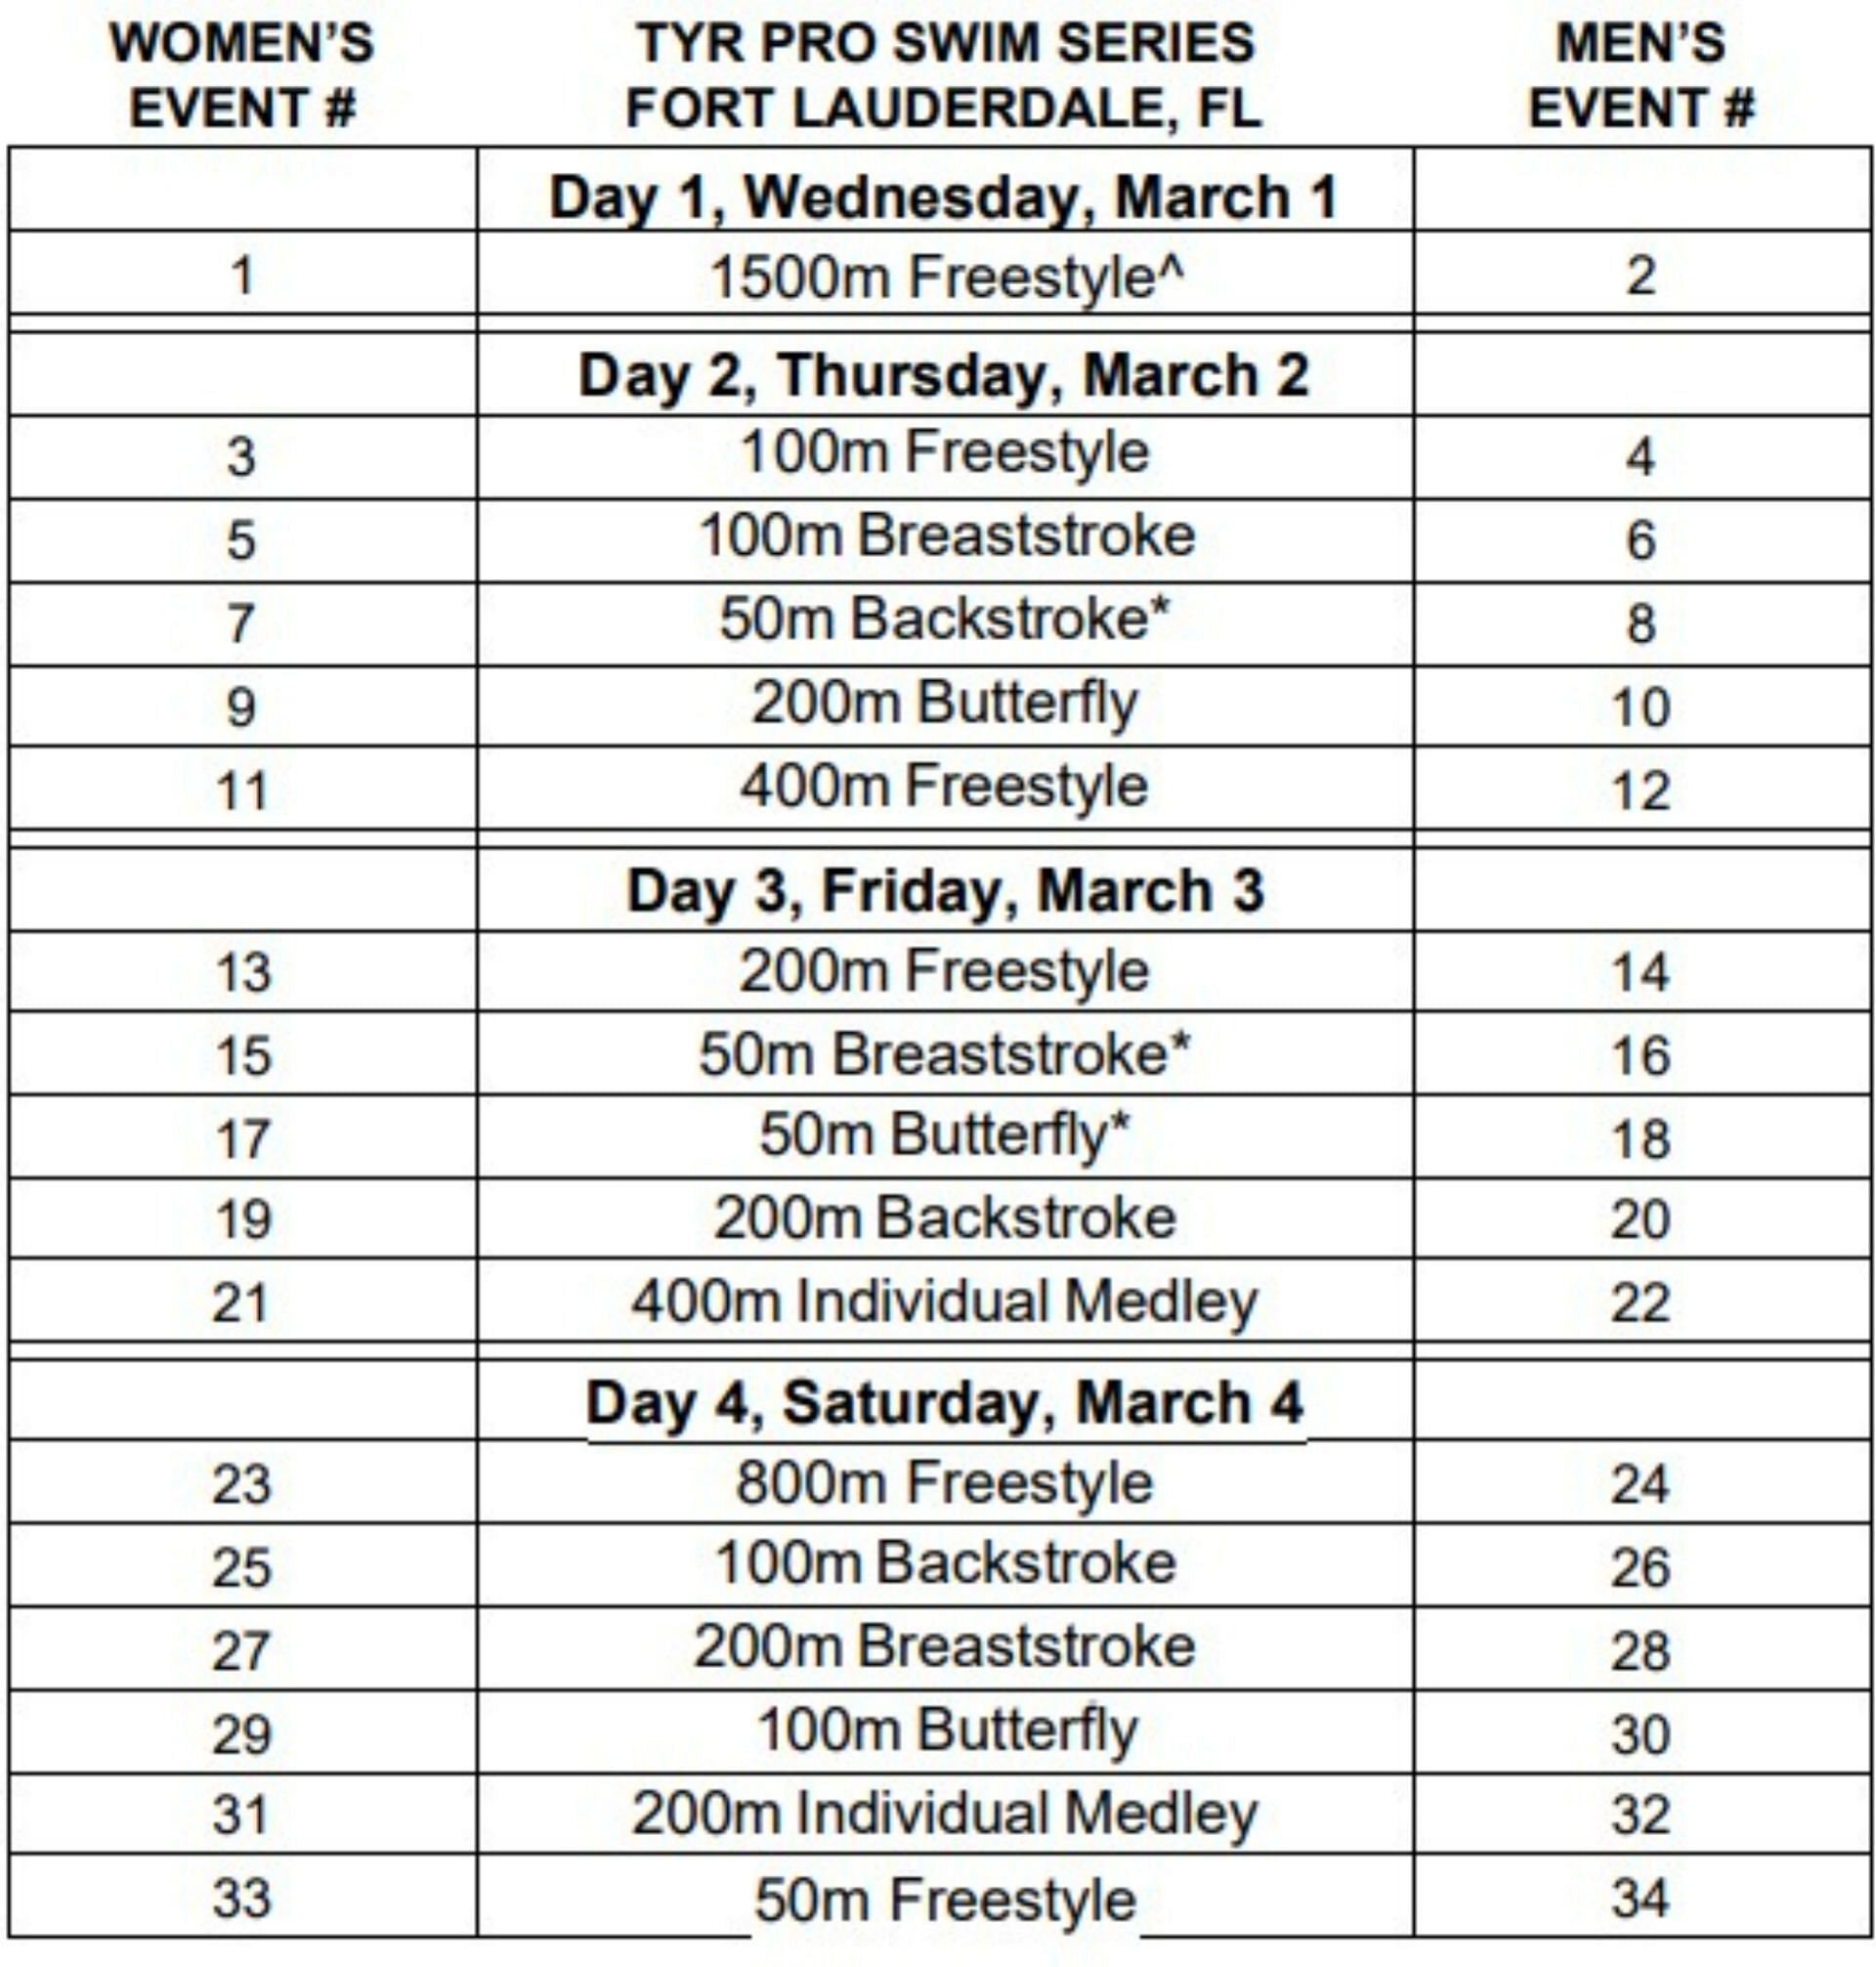 TYR Pro Series Fort Lauderdale Schedule (Image via usaswimming.org)